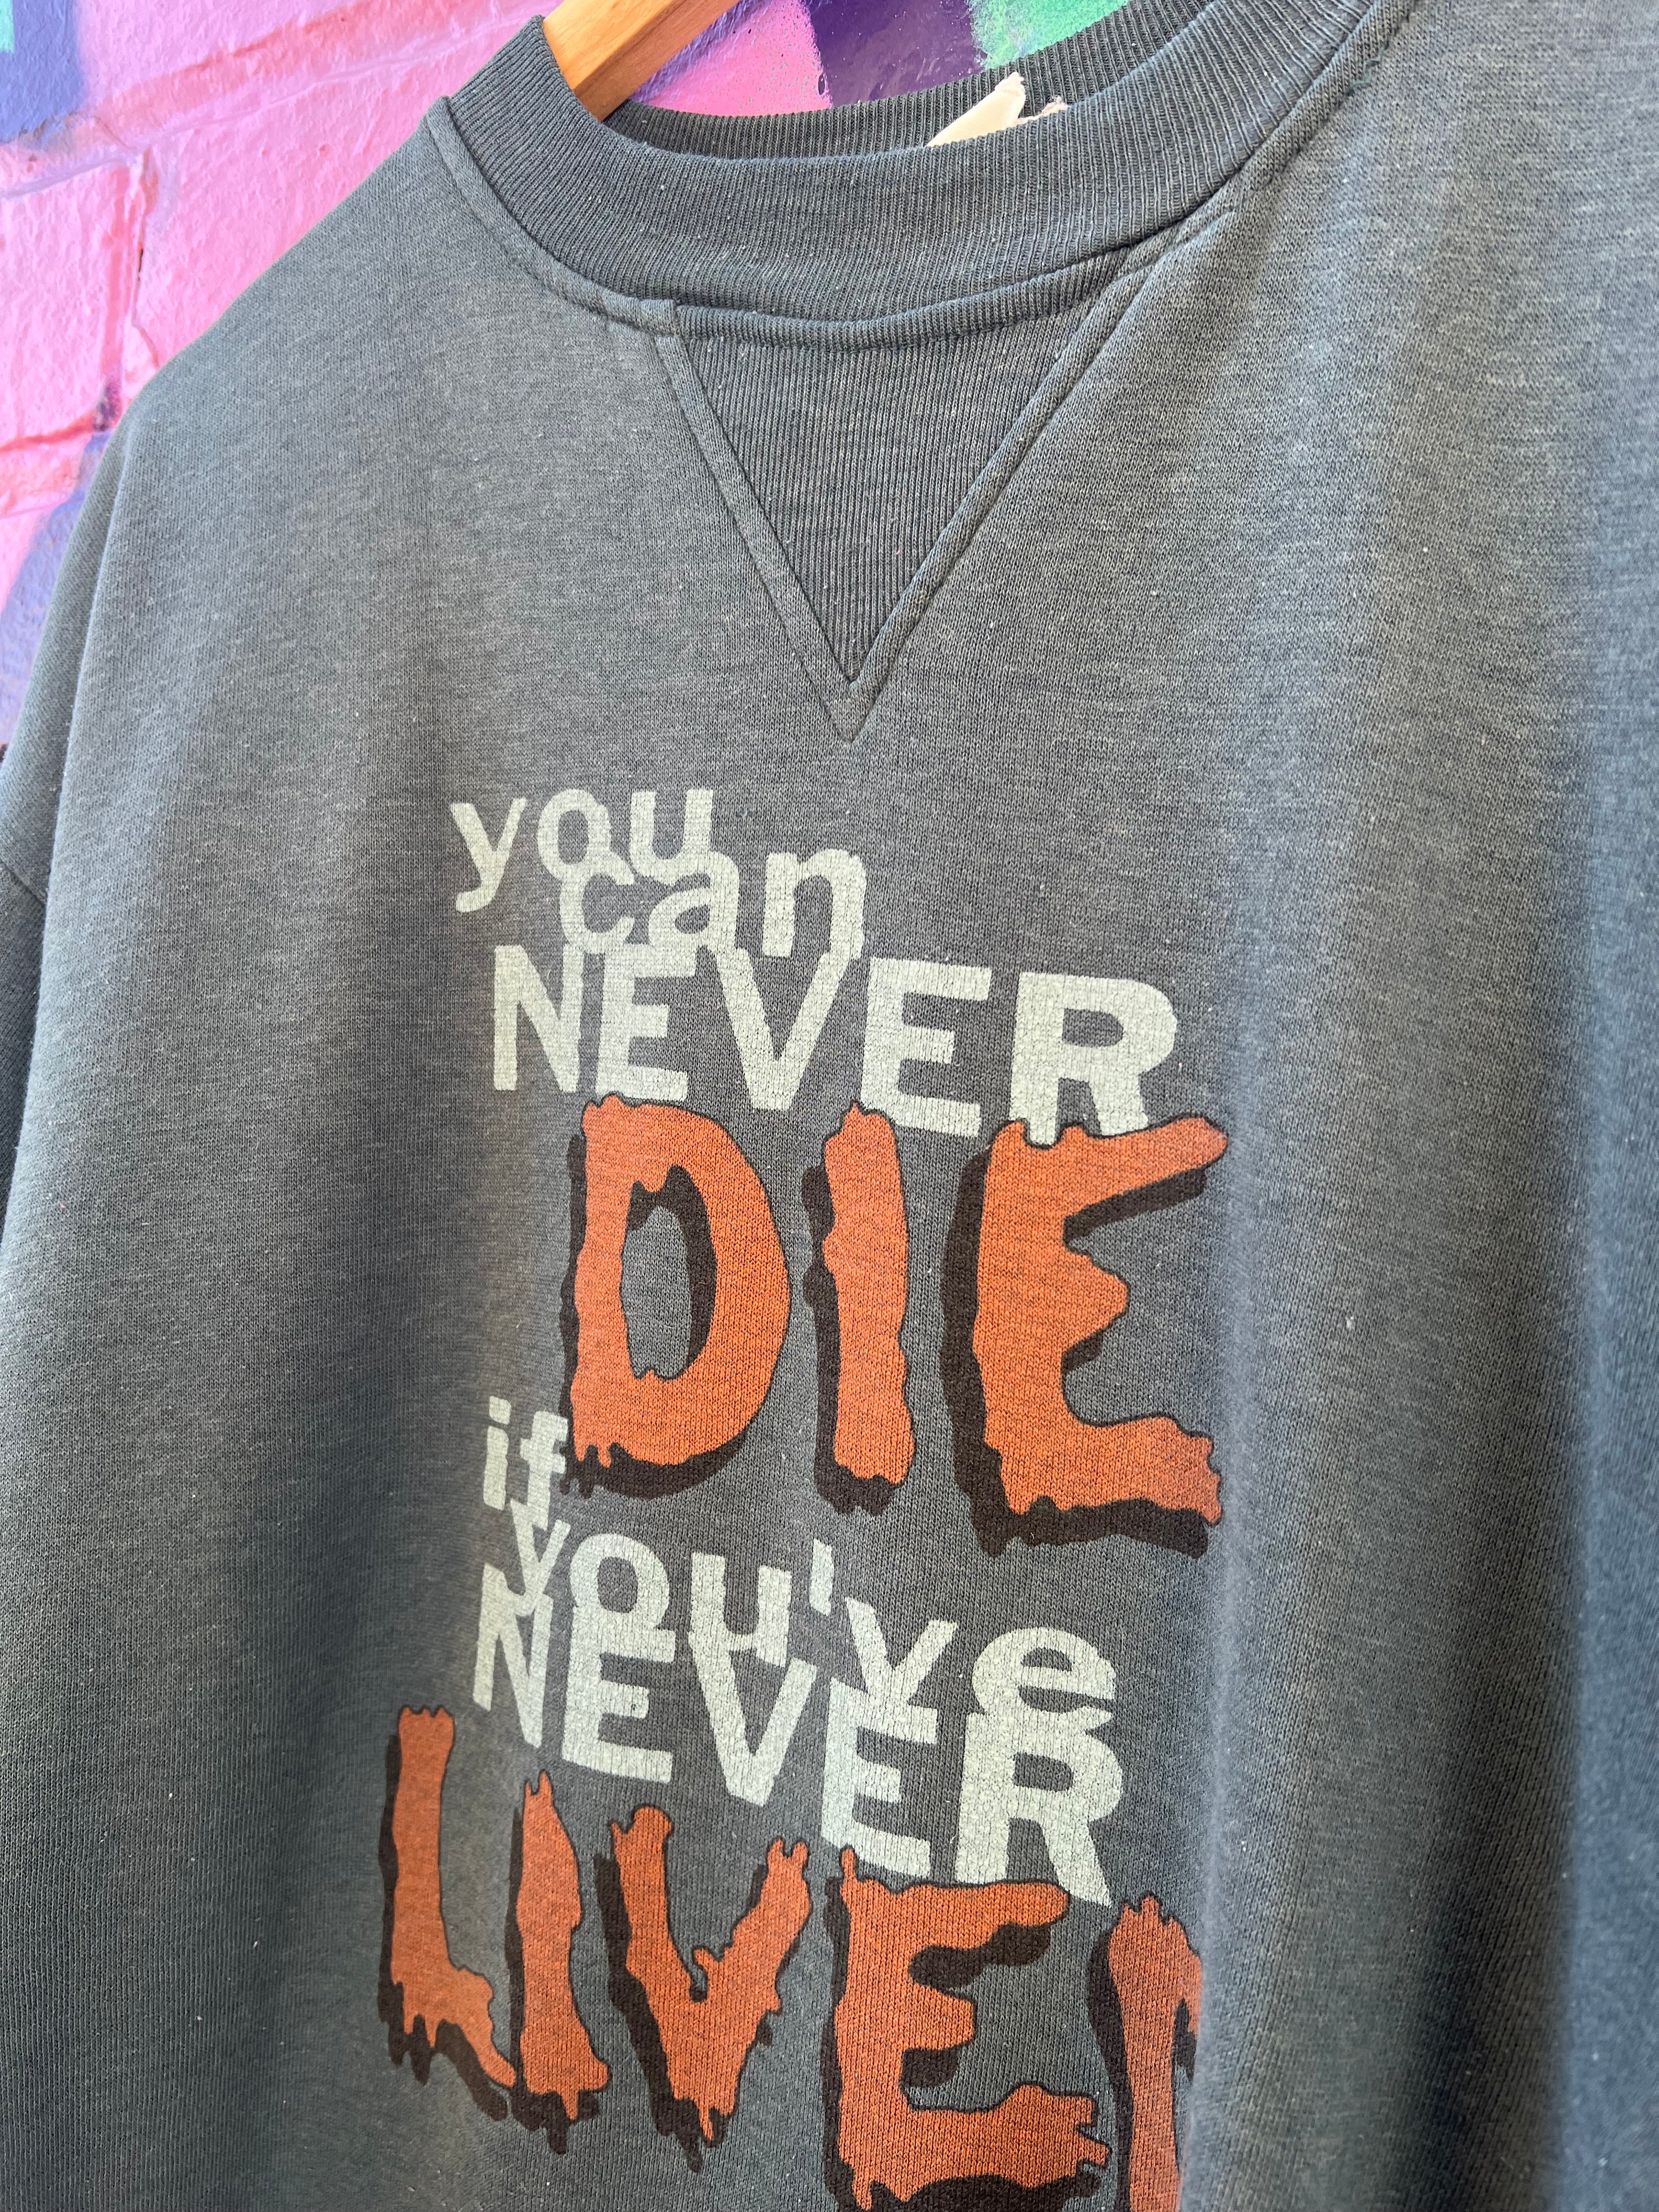 S - You Can Never Die If You've Never Lived Jumper